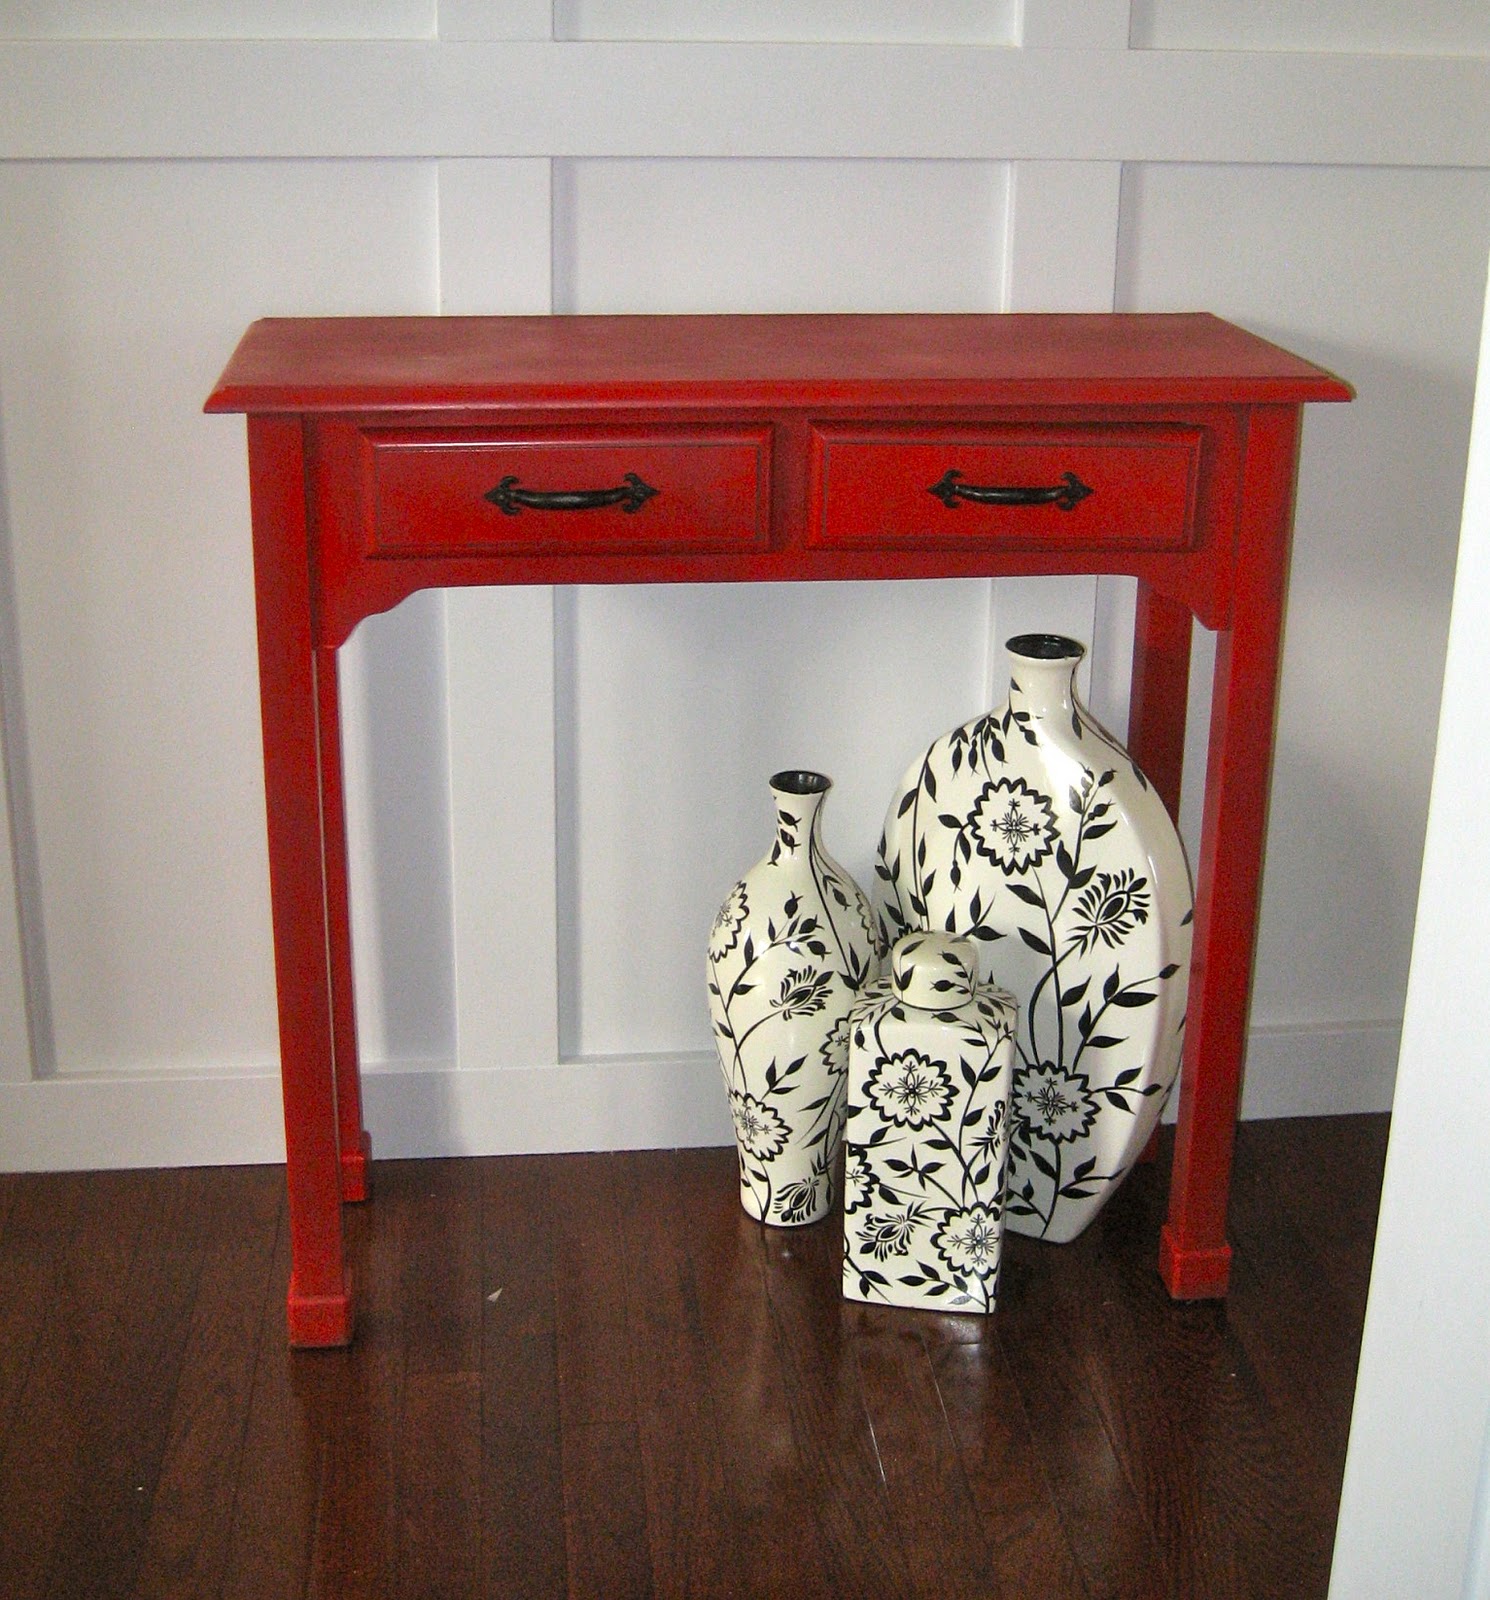 remodelaholic red painted and glazed accent table img nursery small white dining chairs outdoor coffee set teak garden hampton bay furniture unique cocktail tables garage storage